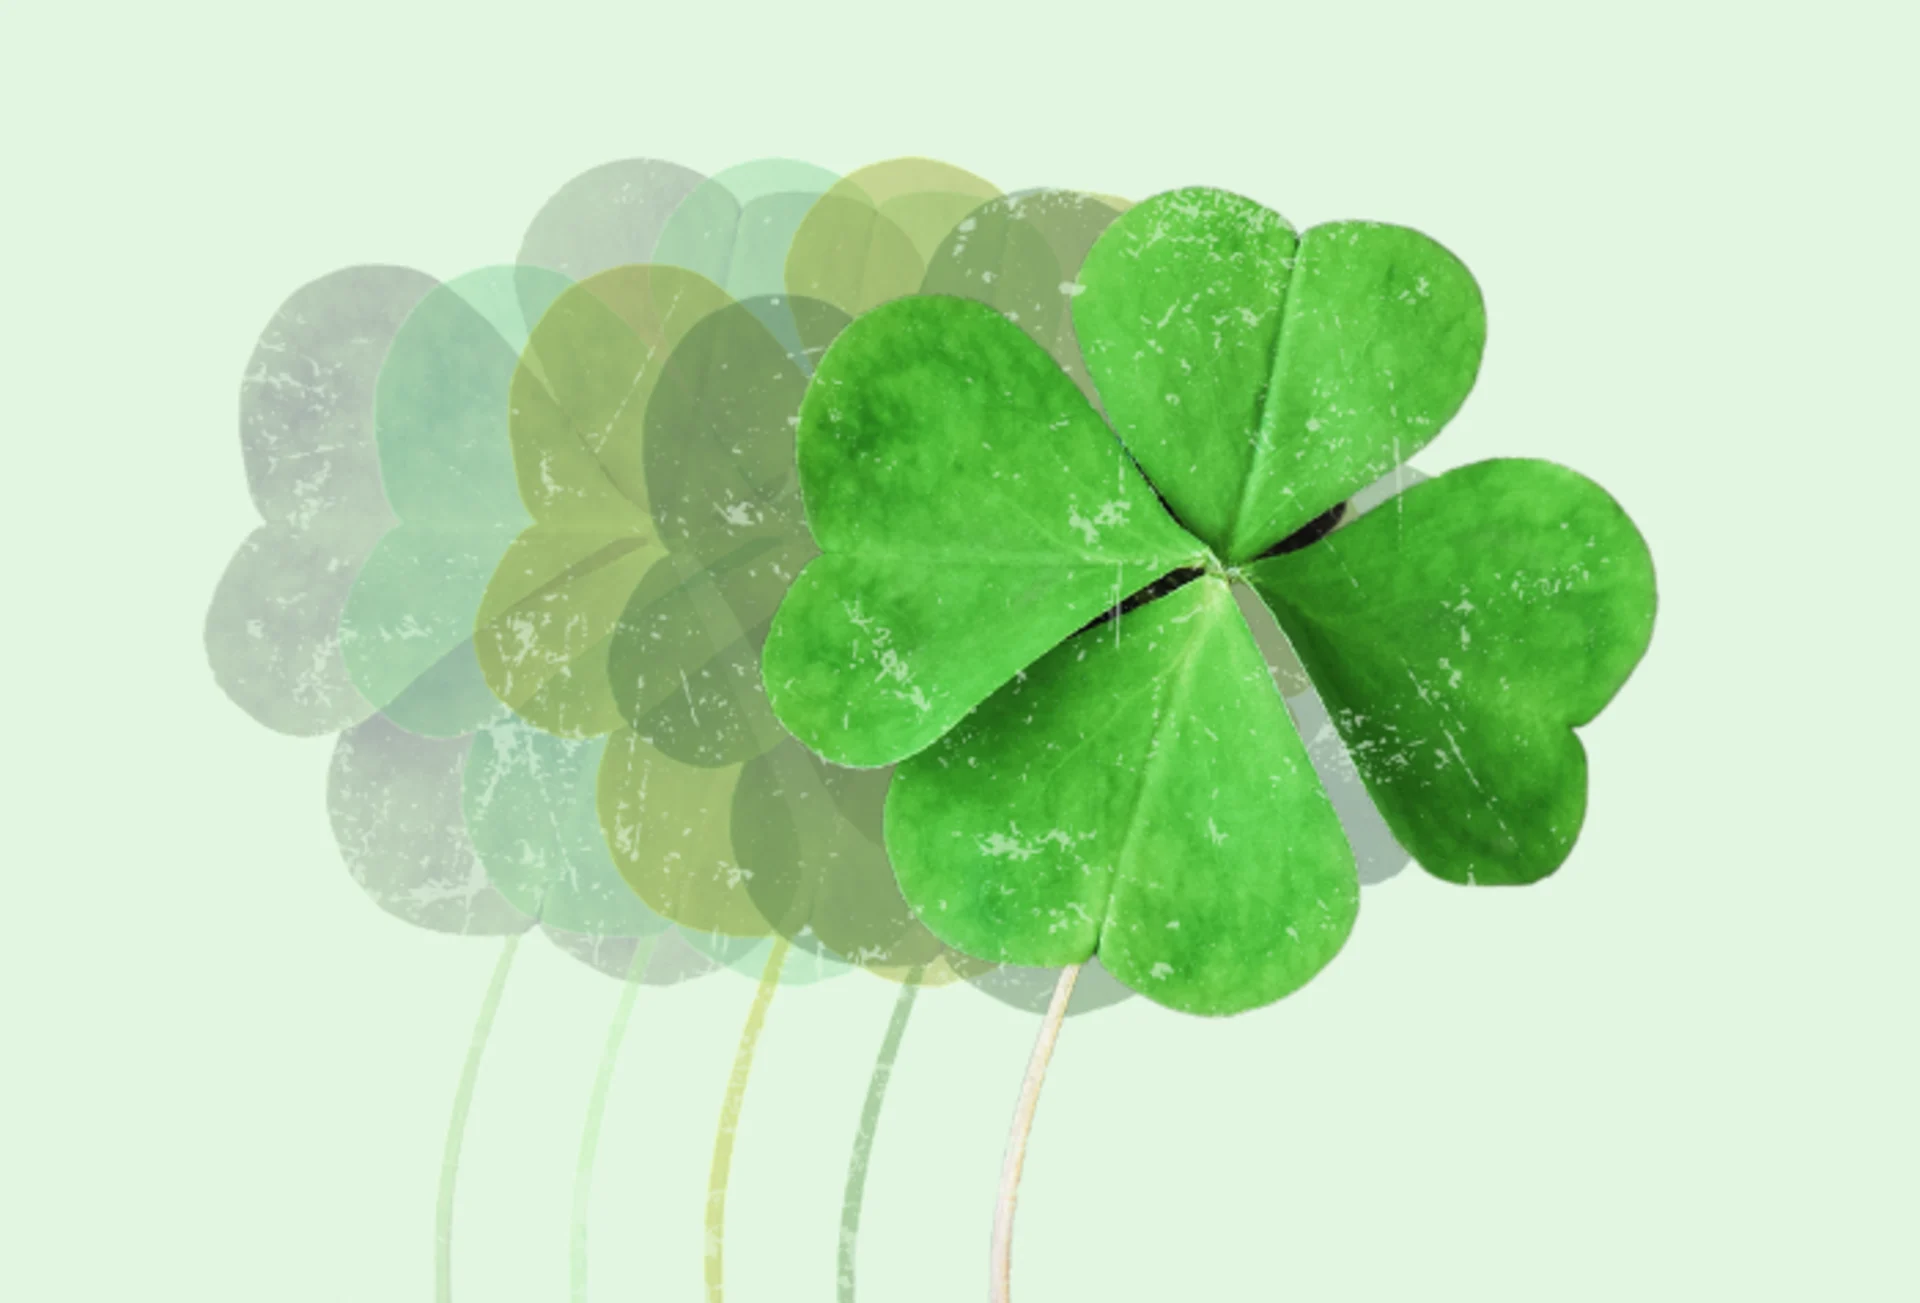 What are your odds of finding a four-leaf clover?